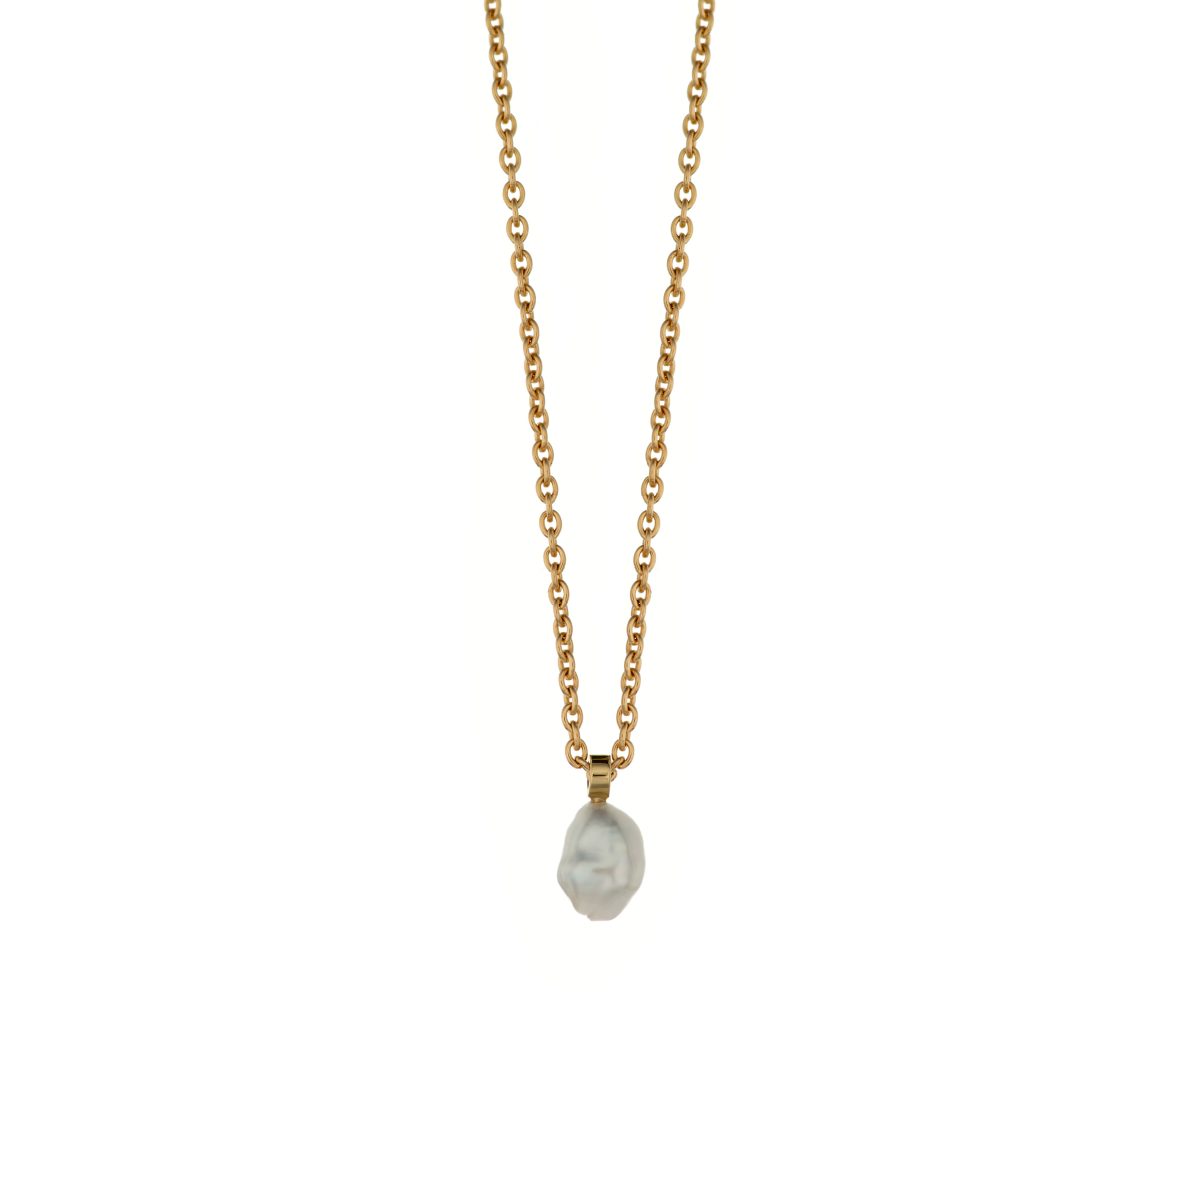 SOUTH SEA KESHI PEARL NECKLACE – 18K GOLD